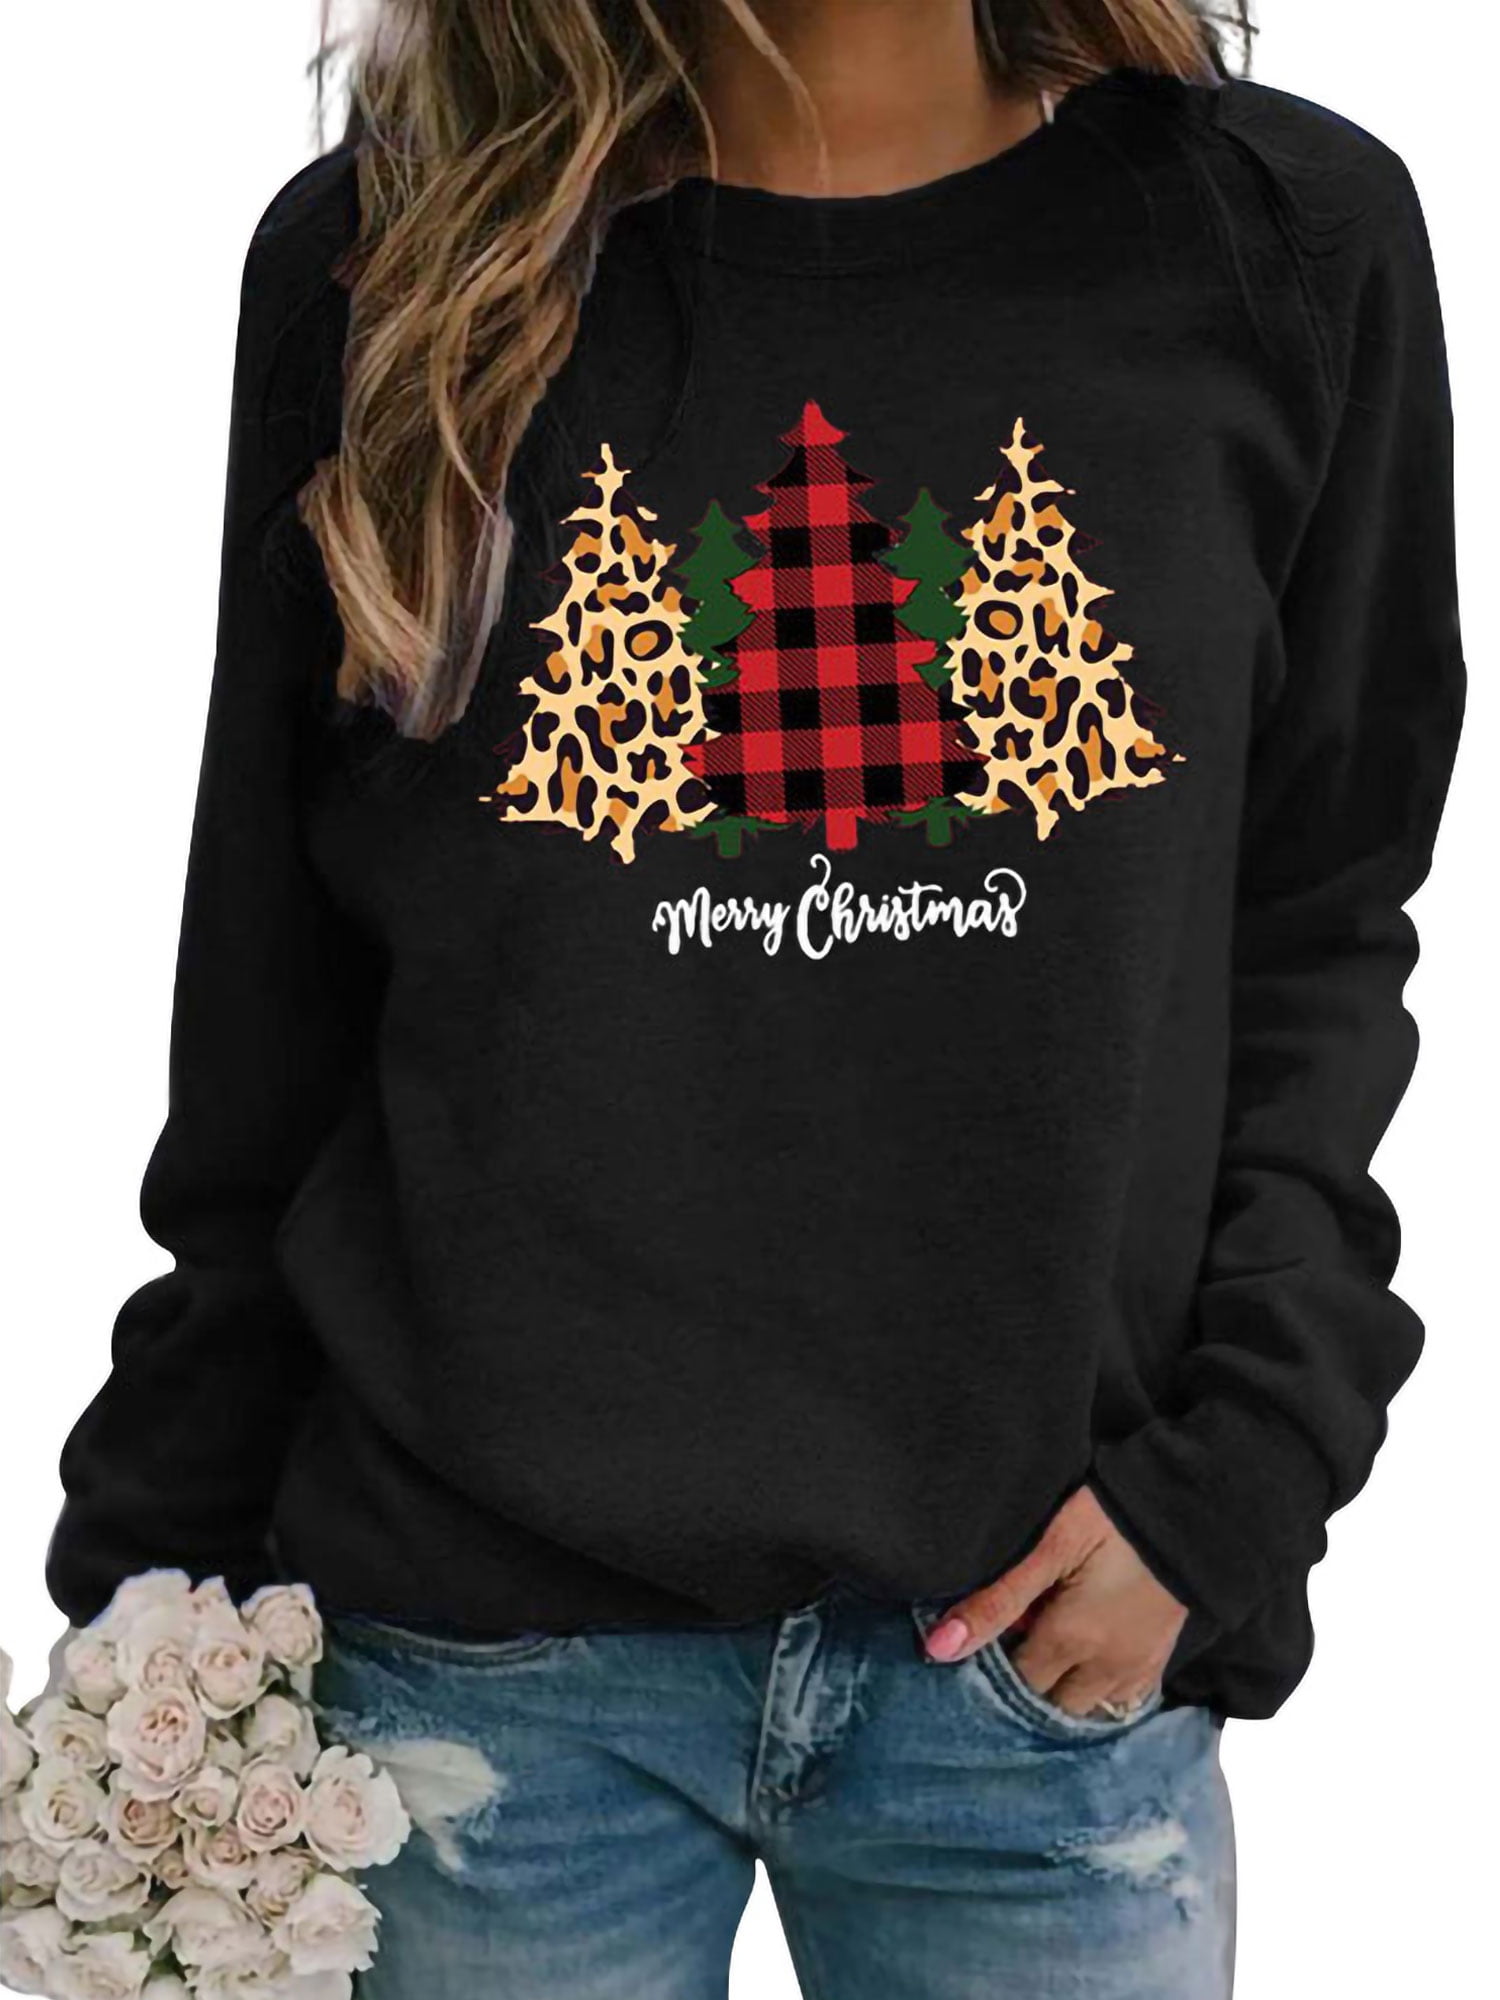 Womens Lightweight Crewneck Long Sleeve Christmas Funny Graphic Sweatshirts Casual Pullovers Fall Tops Tee Shirts